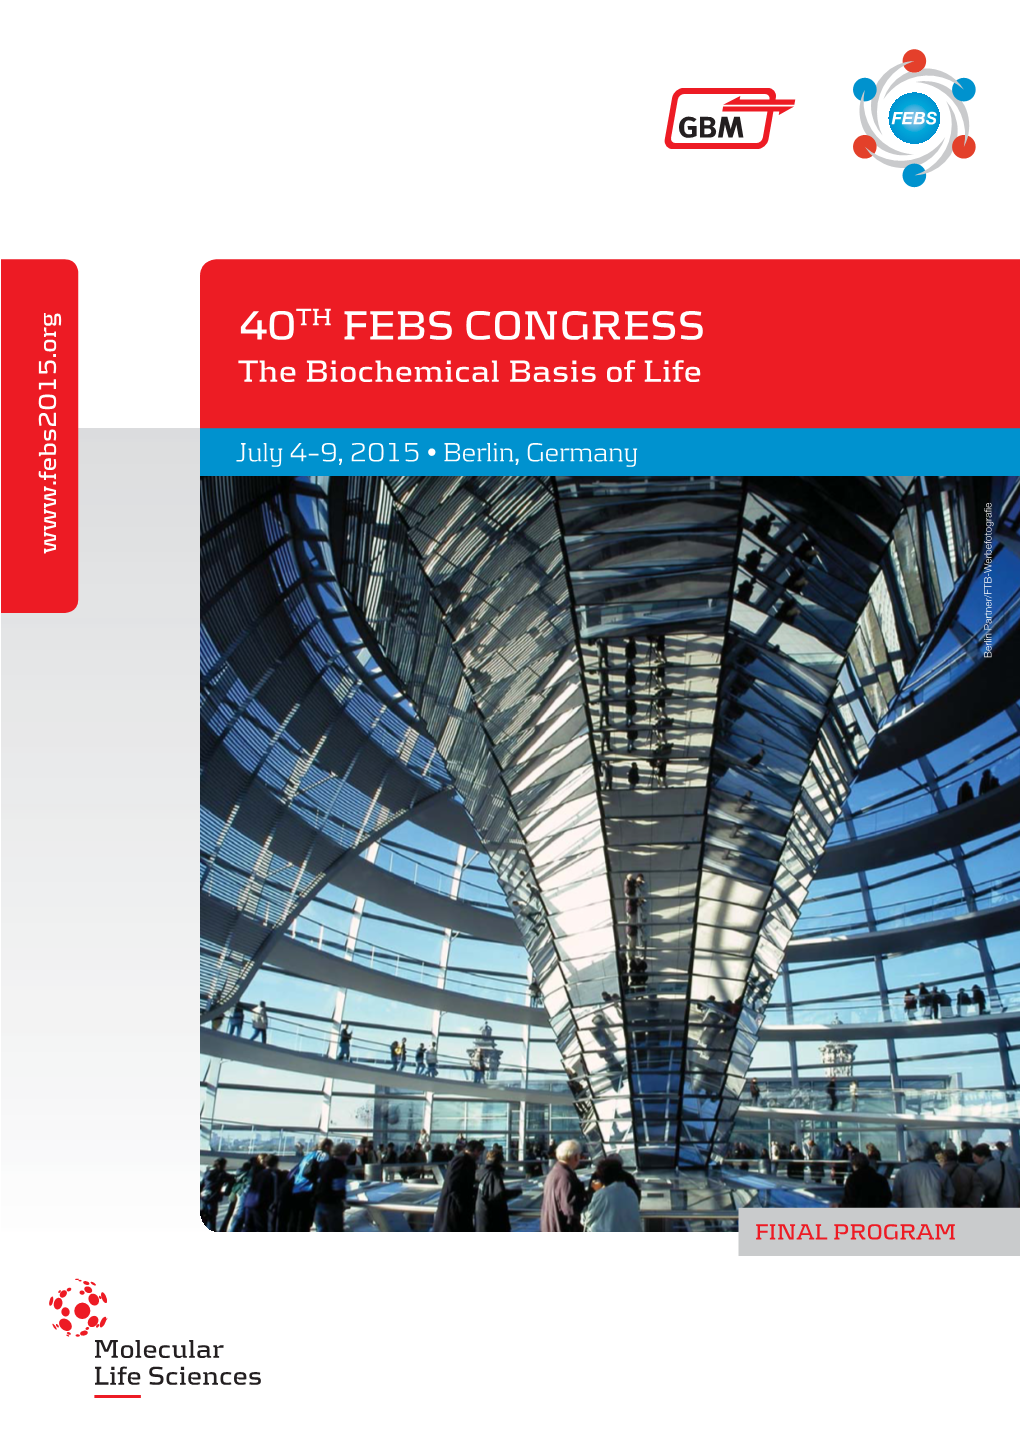 40TH FEBS CONGRESS the Biochemical Basis of Life